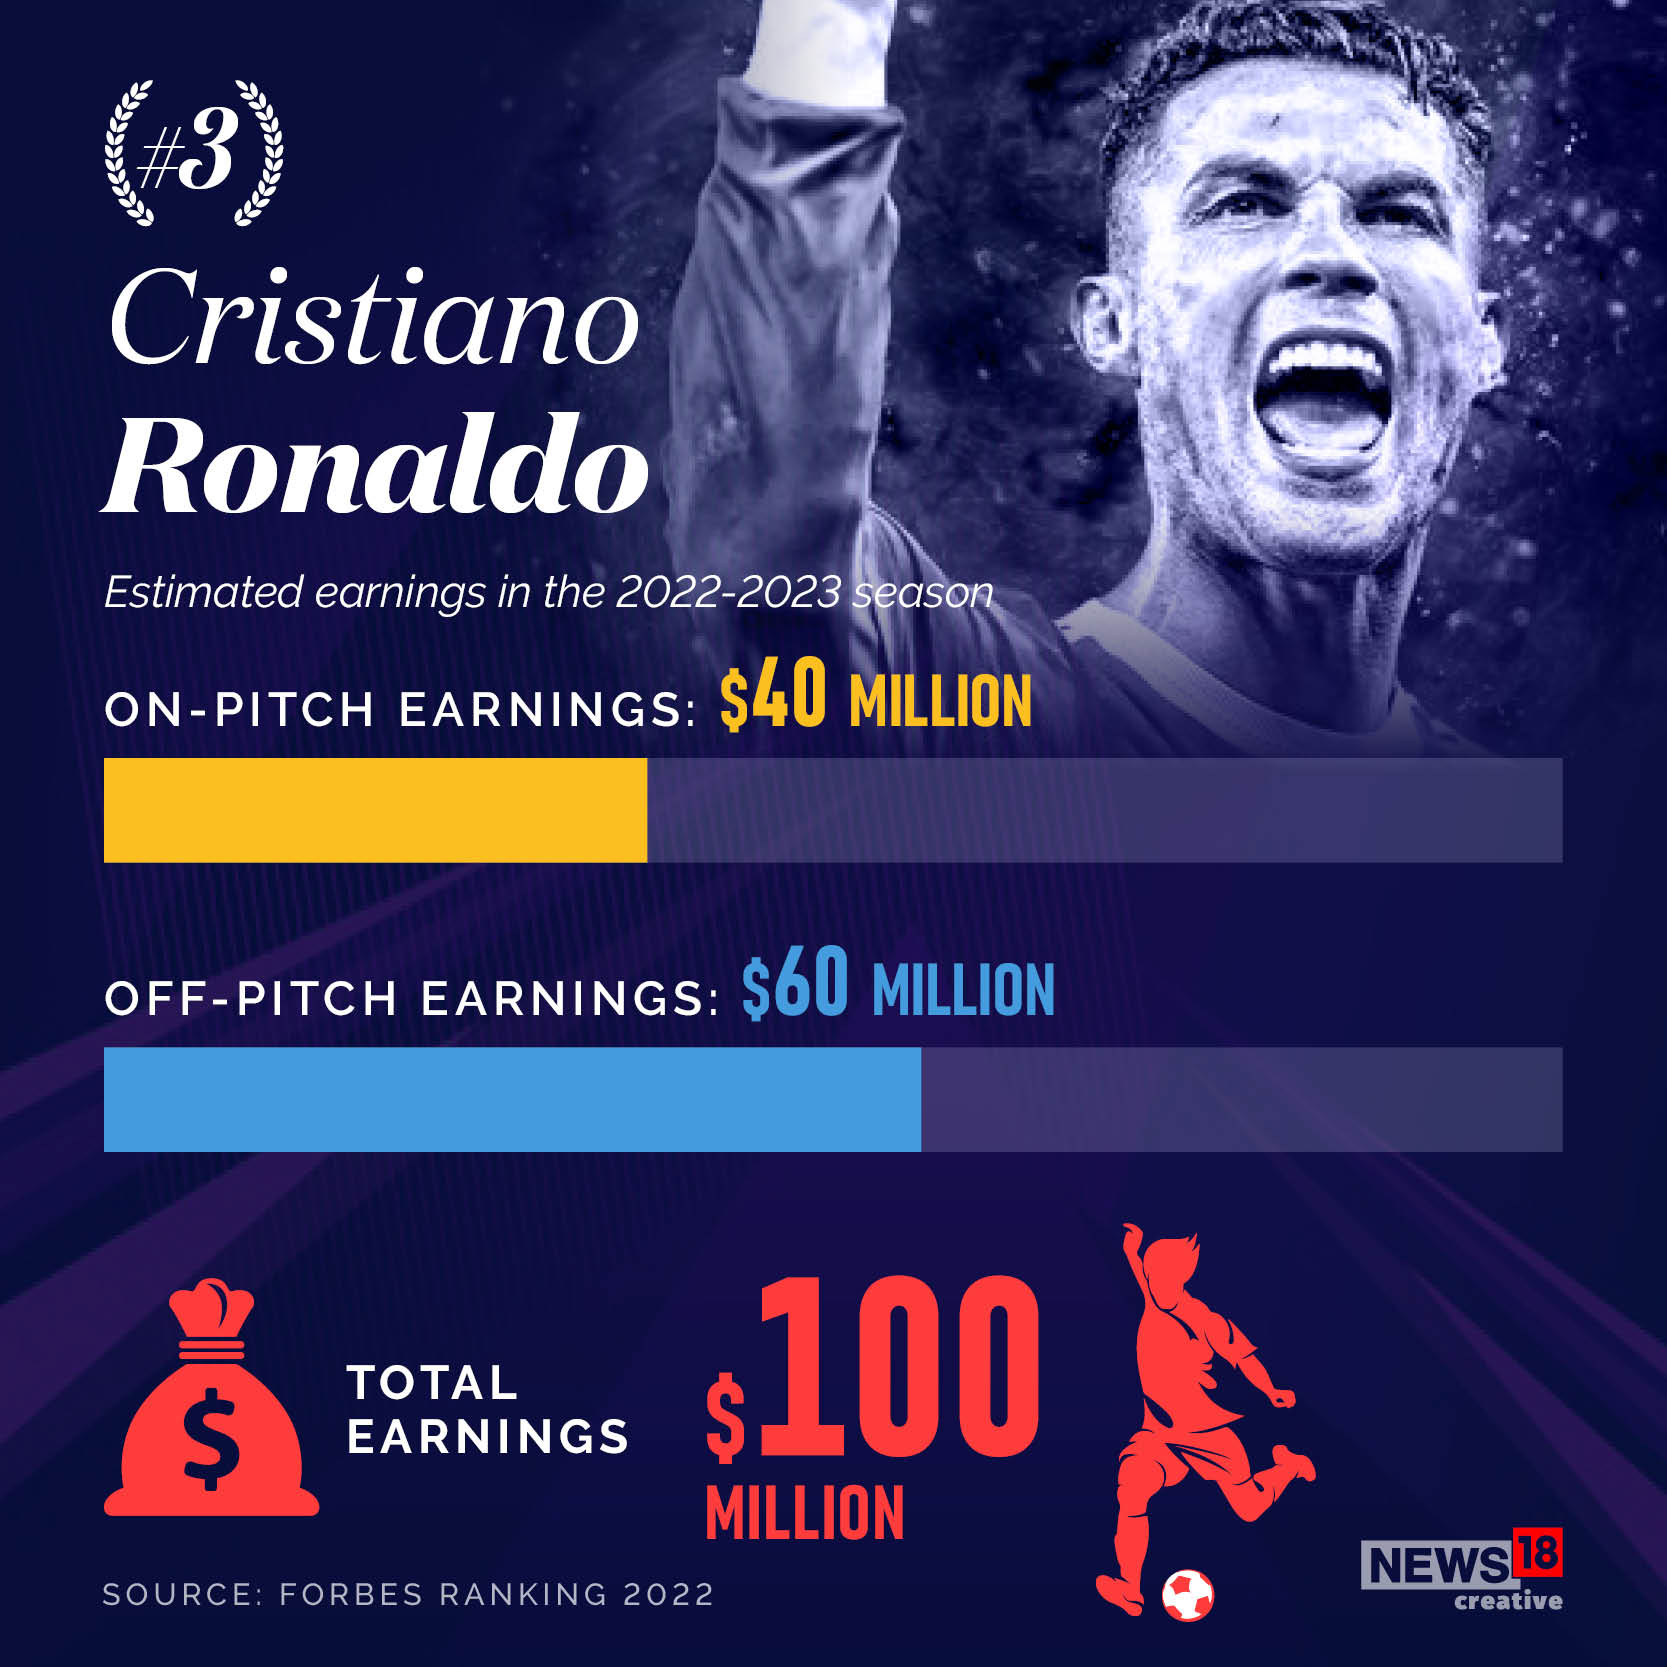 Lionel Messi: One of football's top earners at $110 million